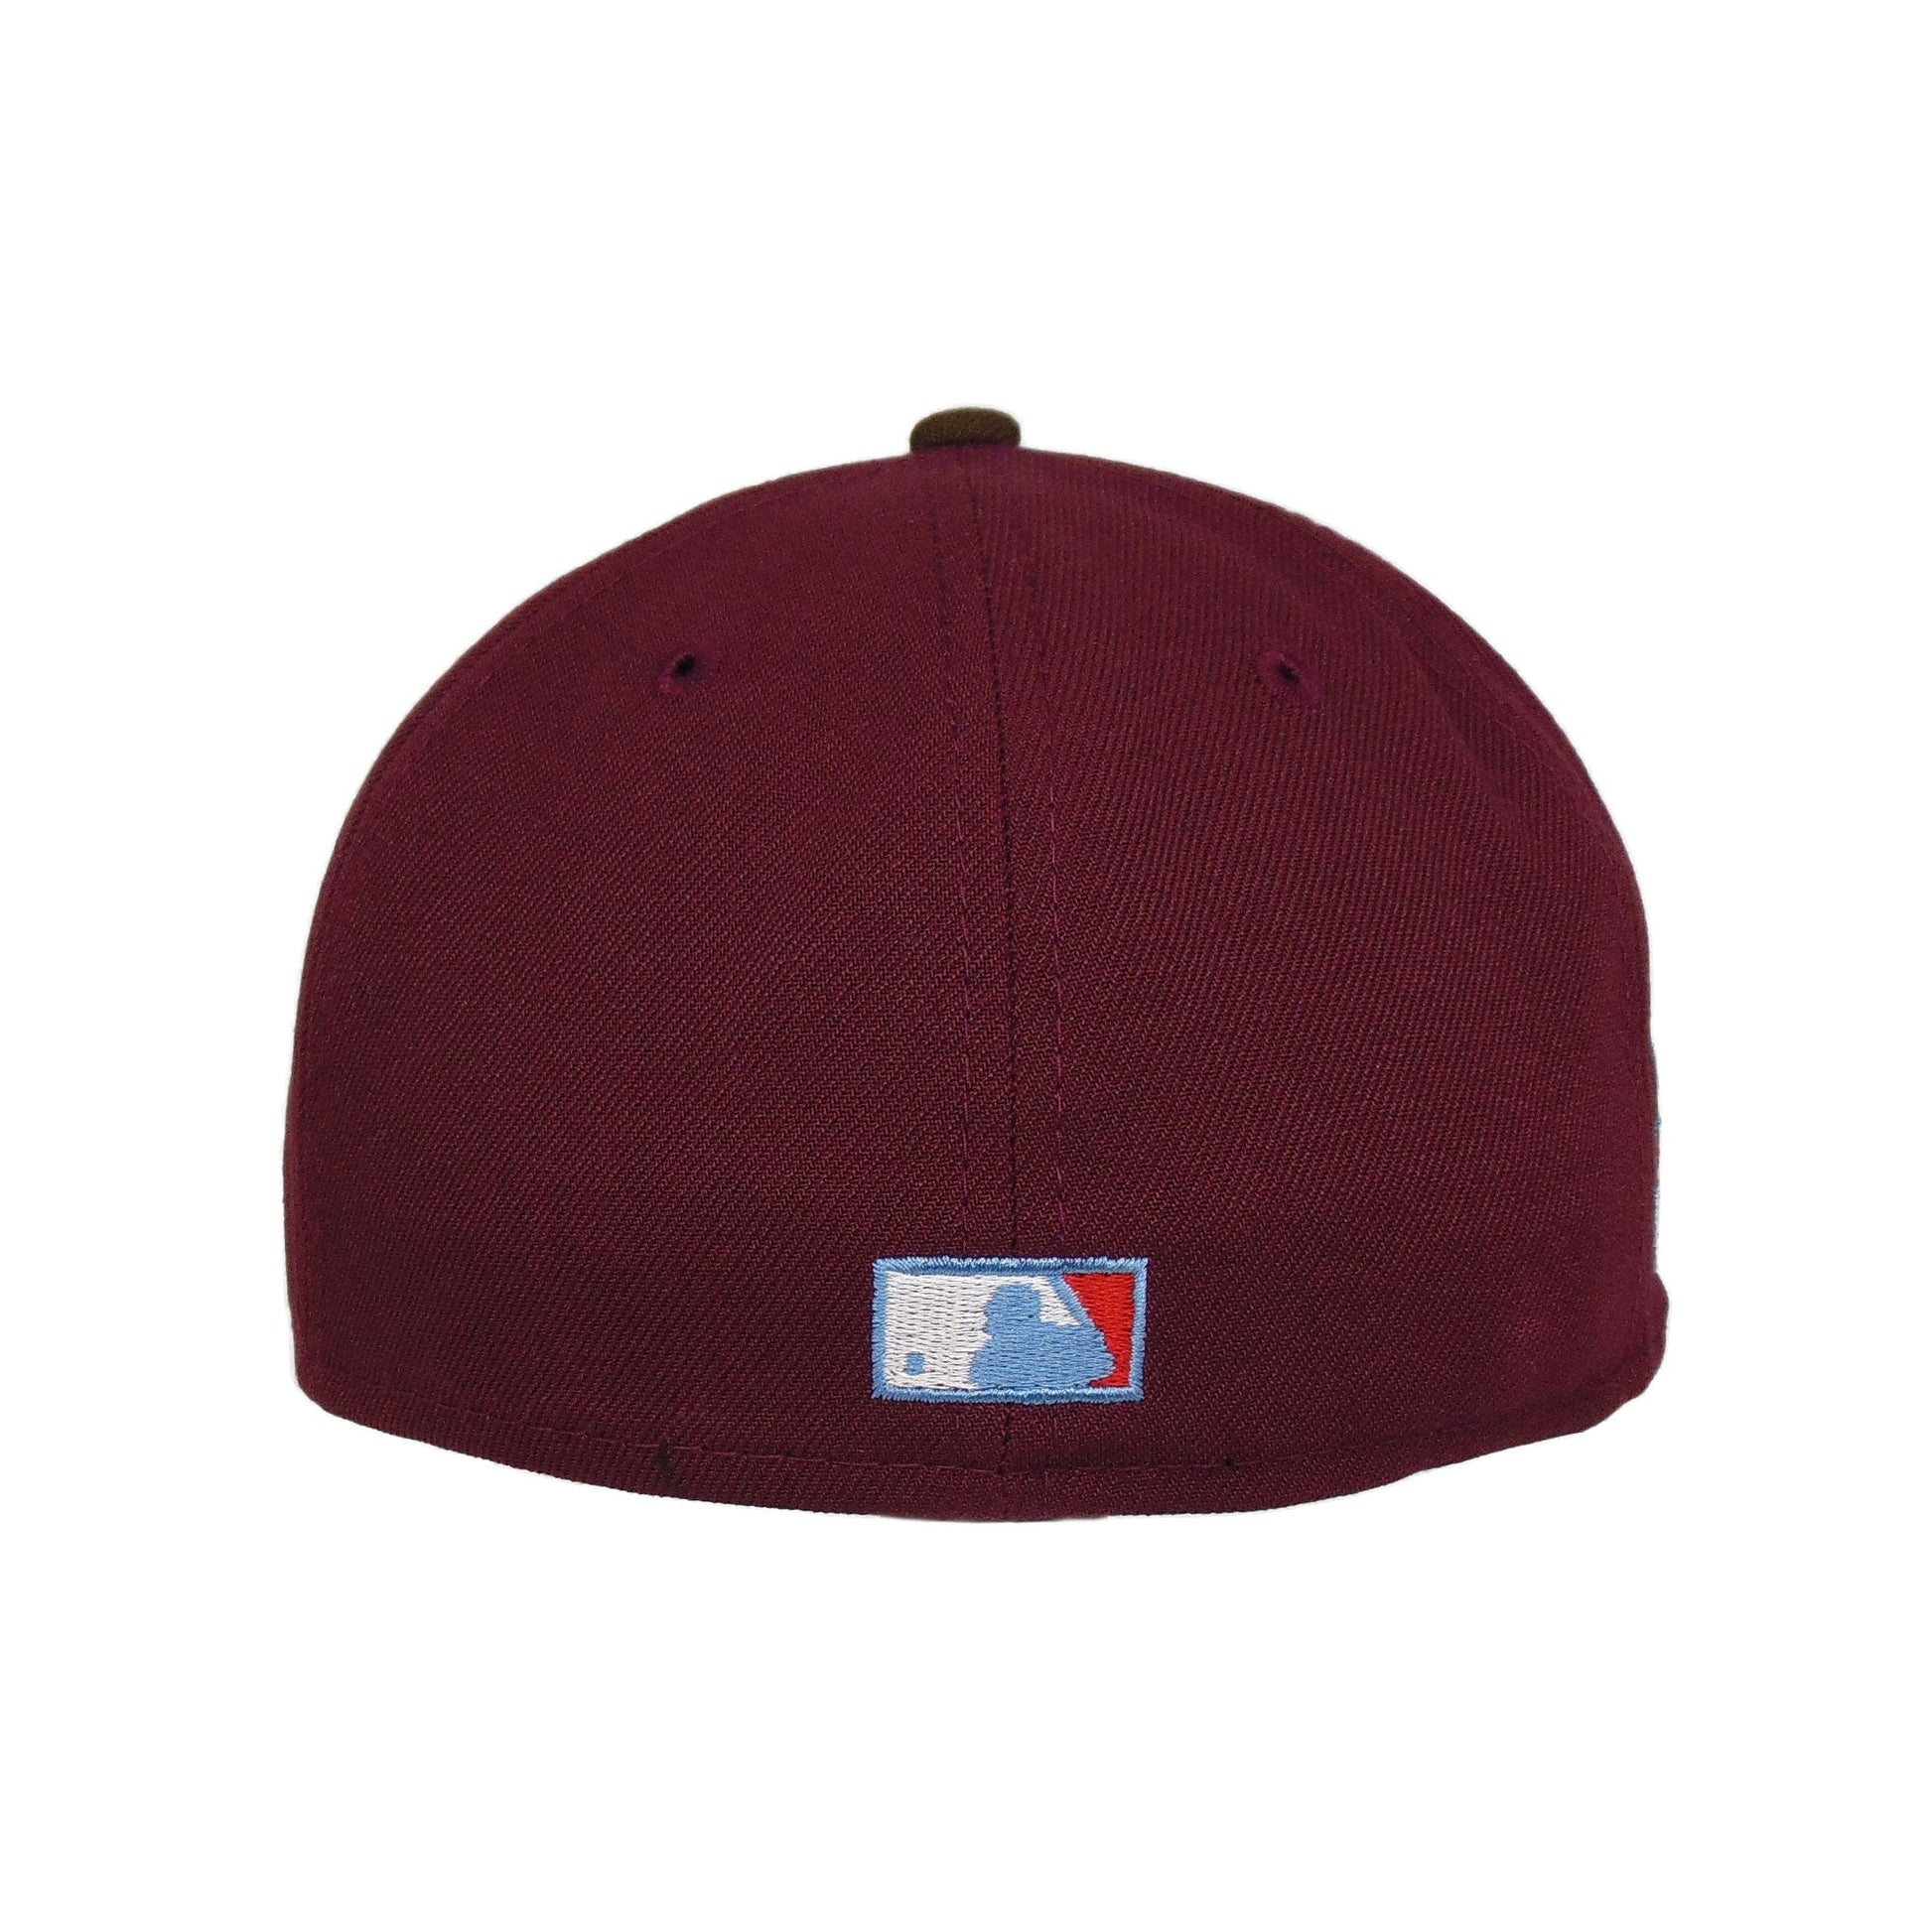 Philadelphia Phillies New Era Cooperstown Collection Wool 59FIFTY Fitted Hat - Maroon